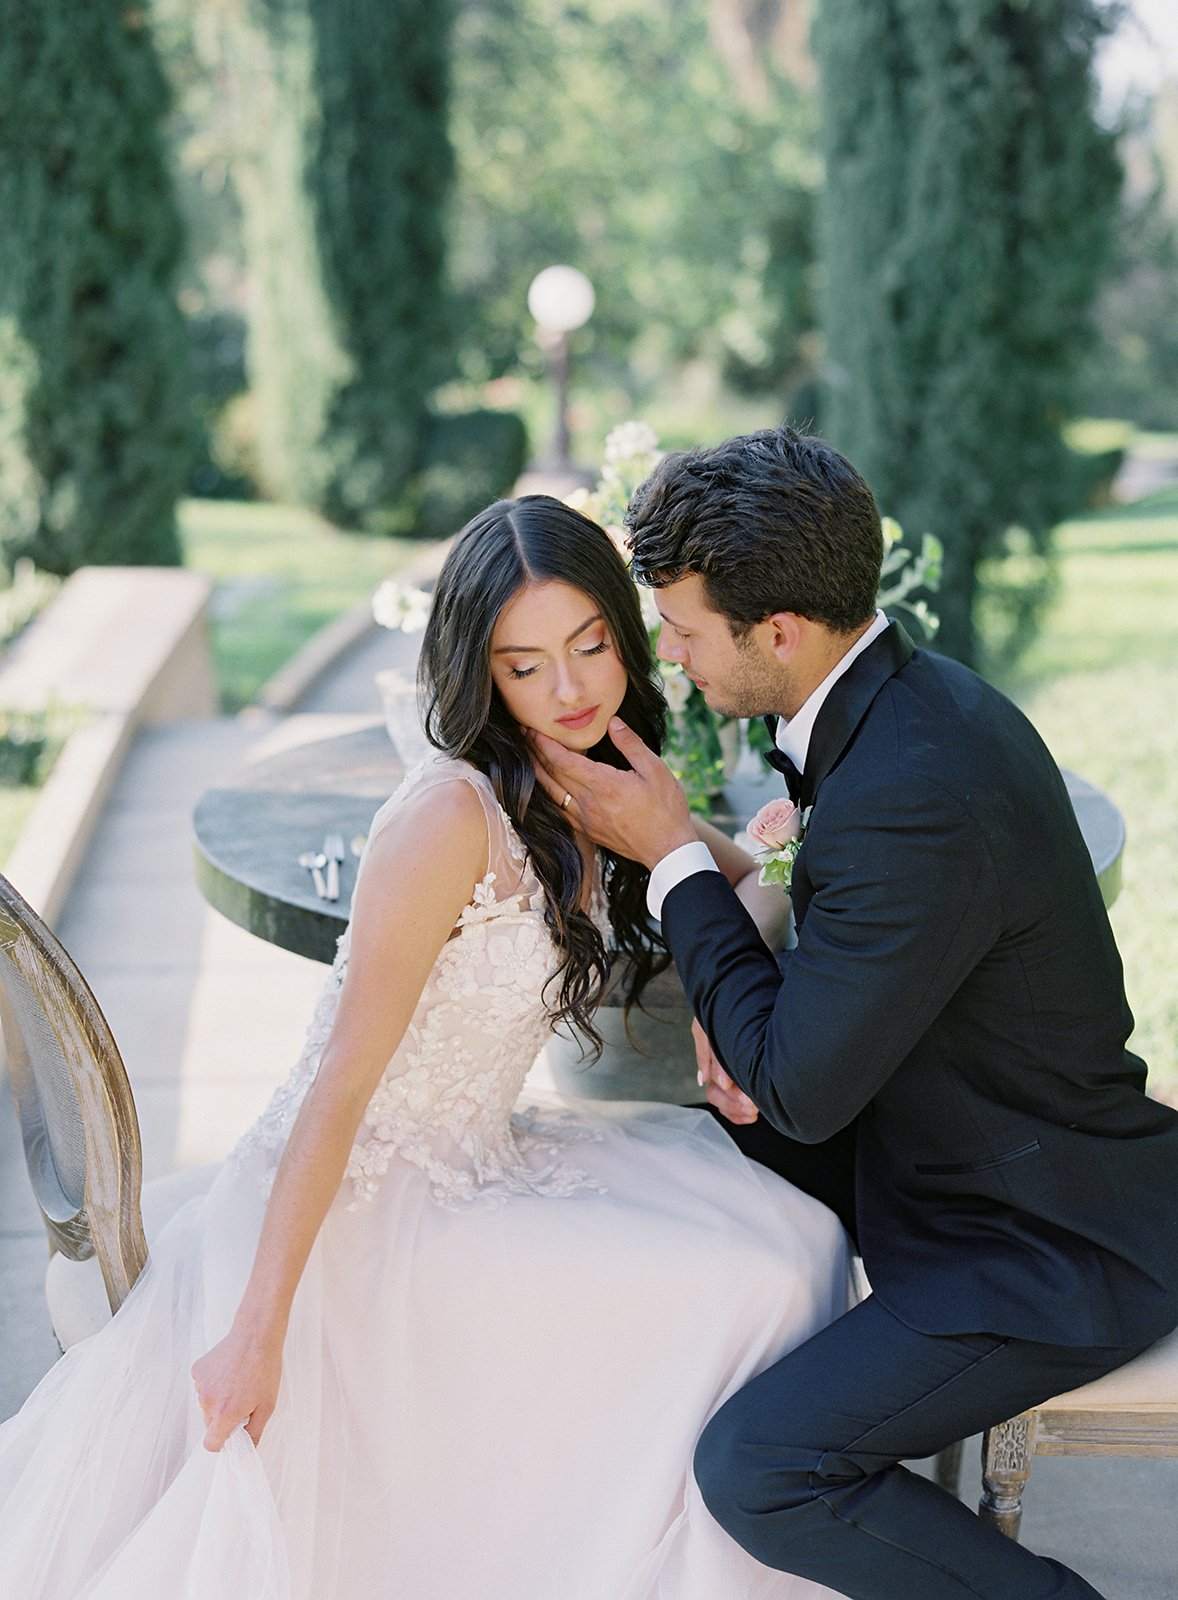 www.santabarbarawedding.com | Besame Floral | Carrie King Photography | Styled Shoot | Bride and Groom